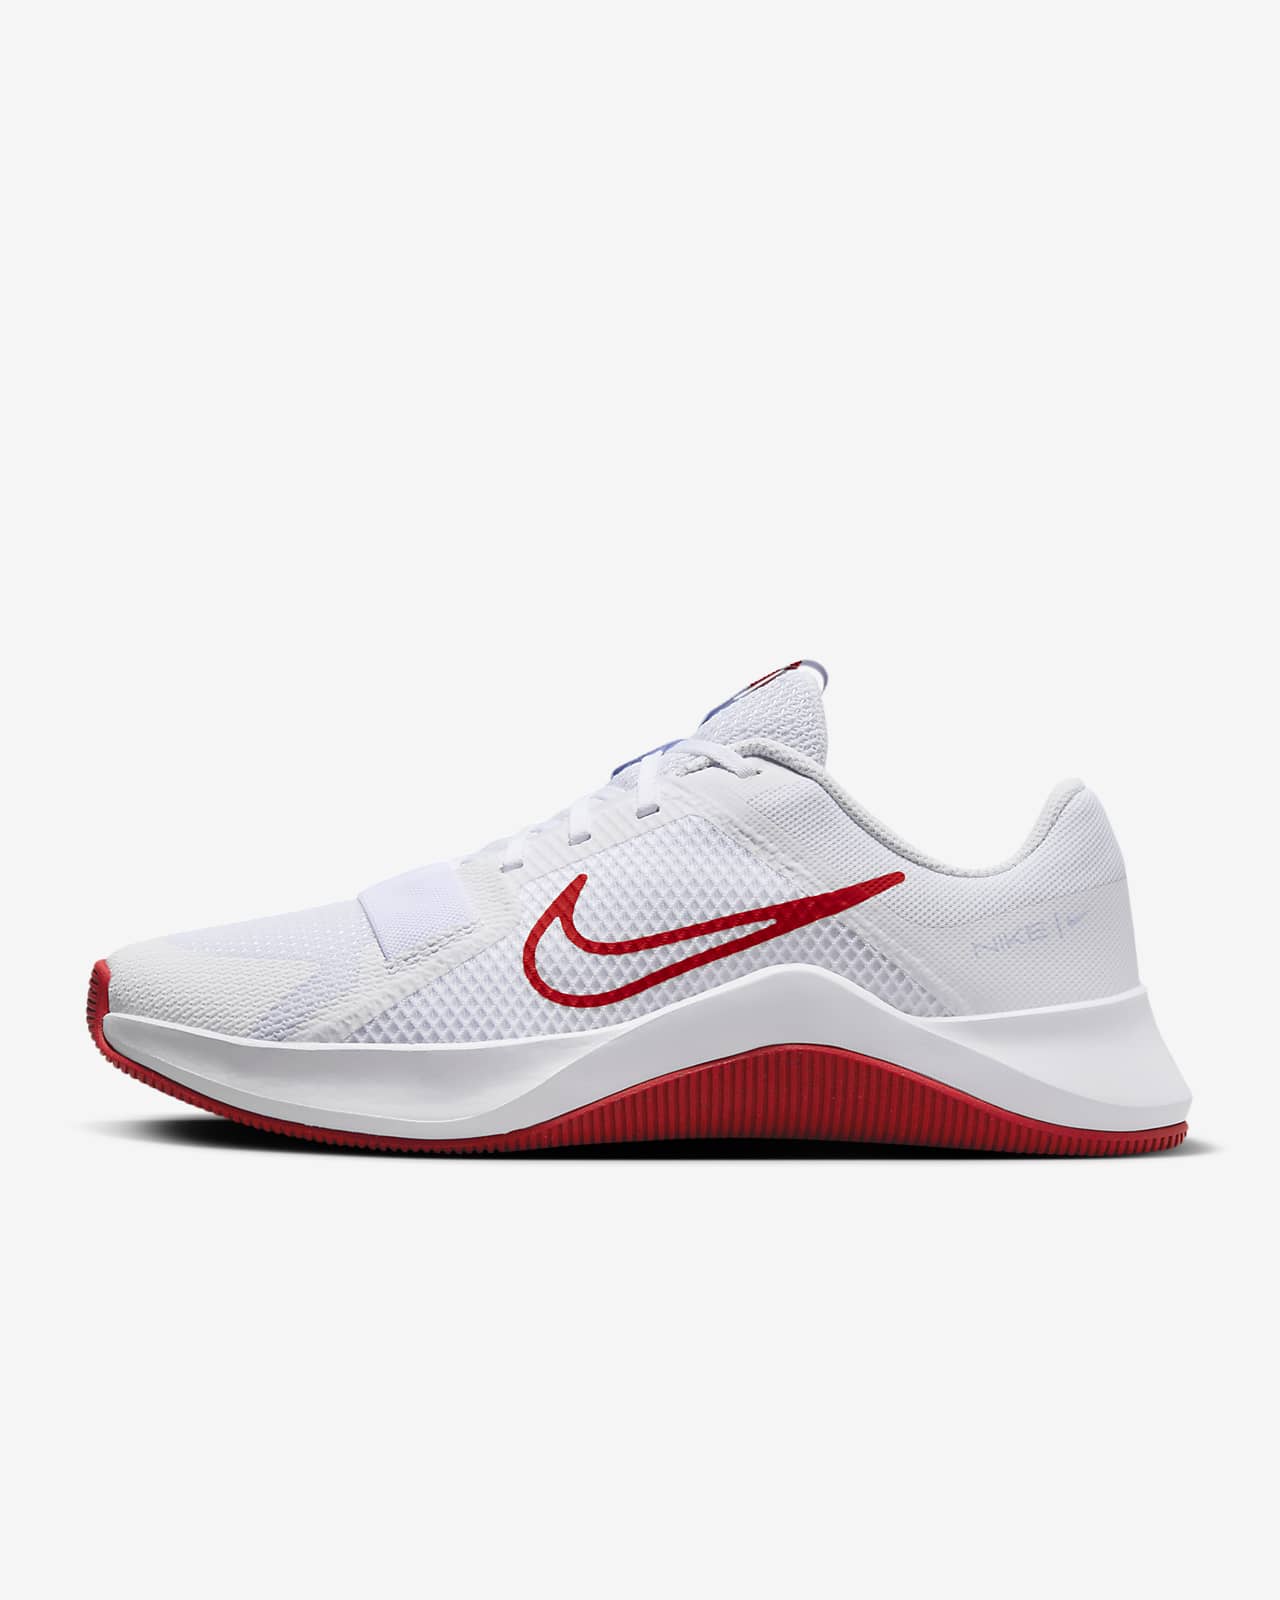 Men's Trainers & Shoes. Nike IE